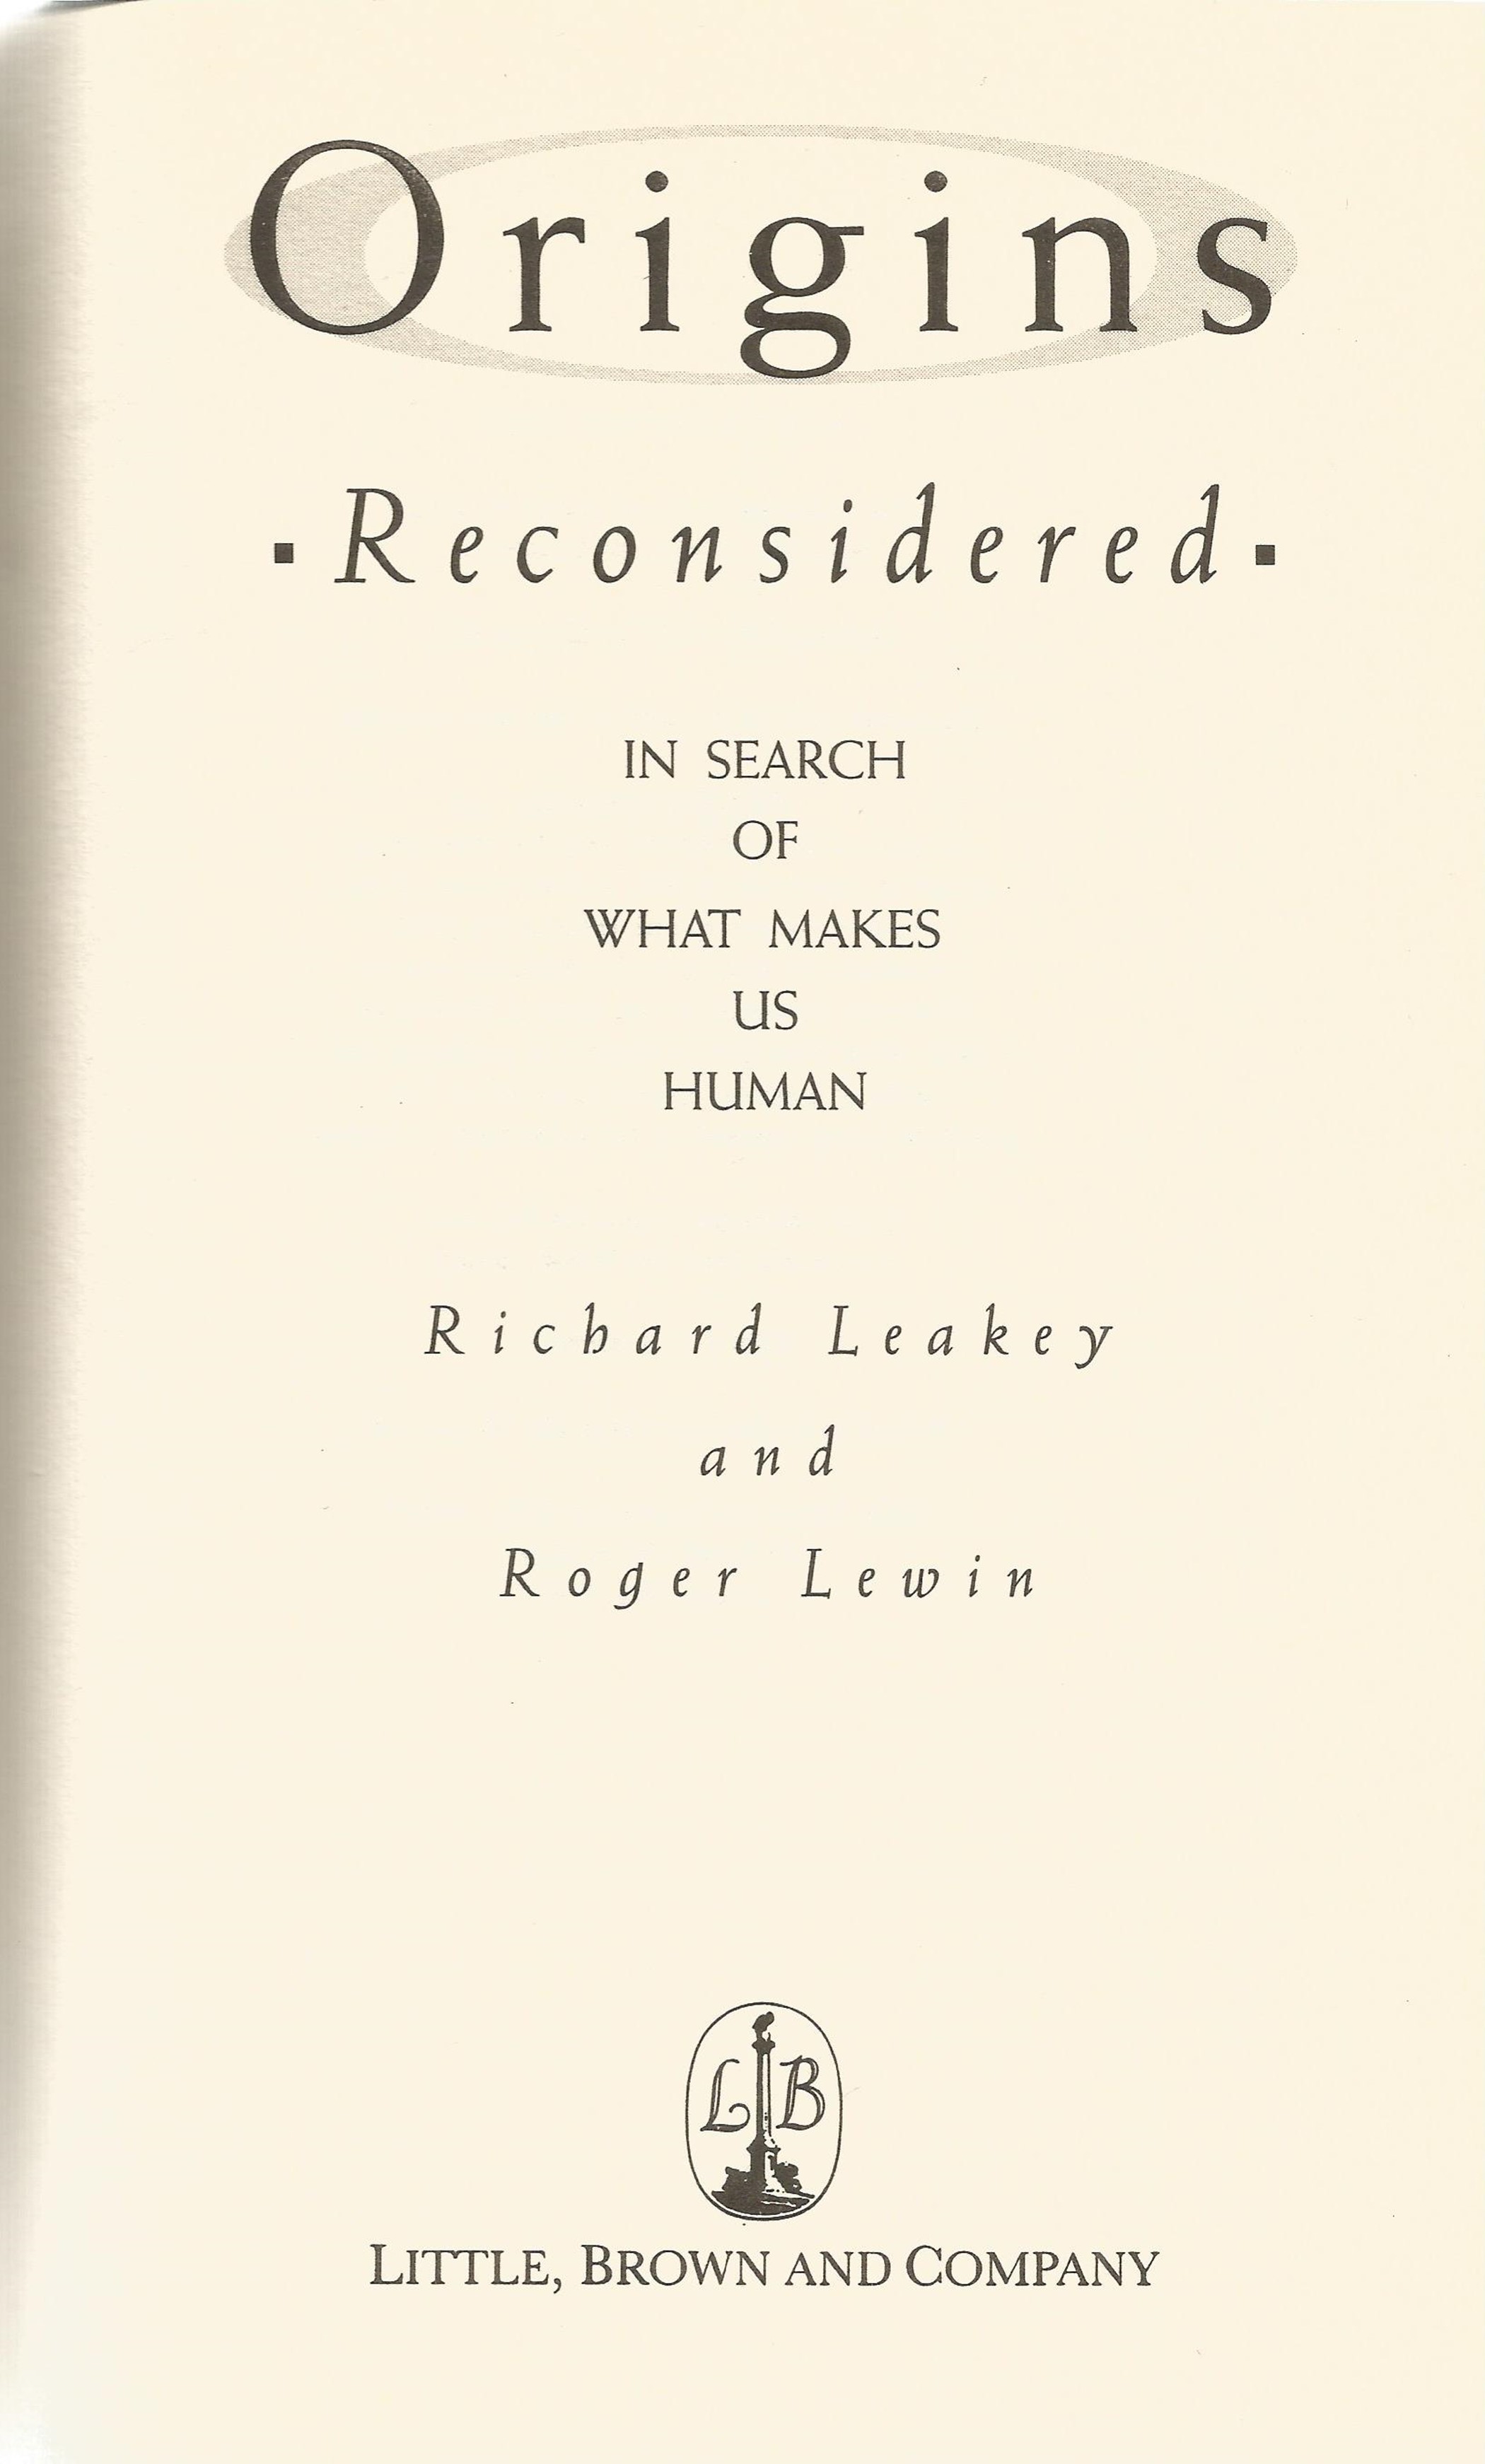 Origins Reconsidered In Search of What make us Human by R Leakey and R Lewin Hardback Book 1992 - Image 2 of 3